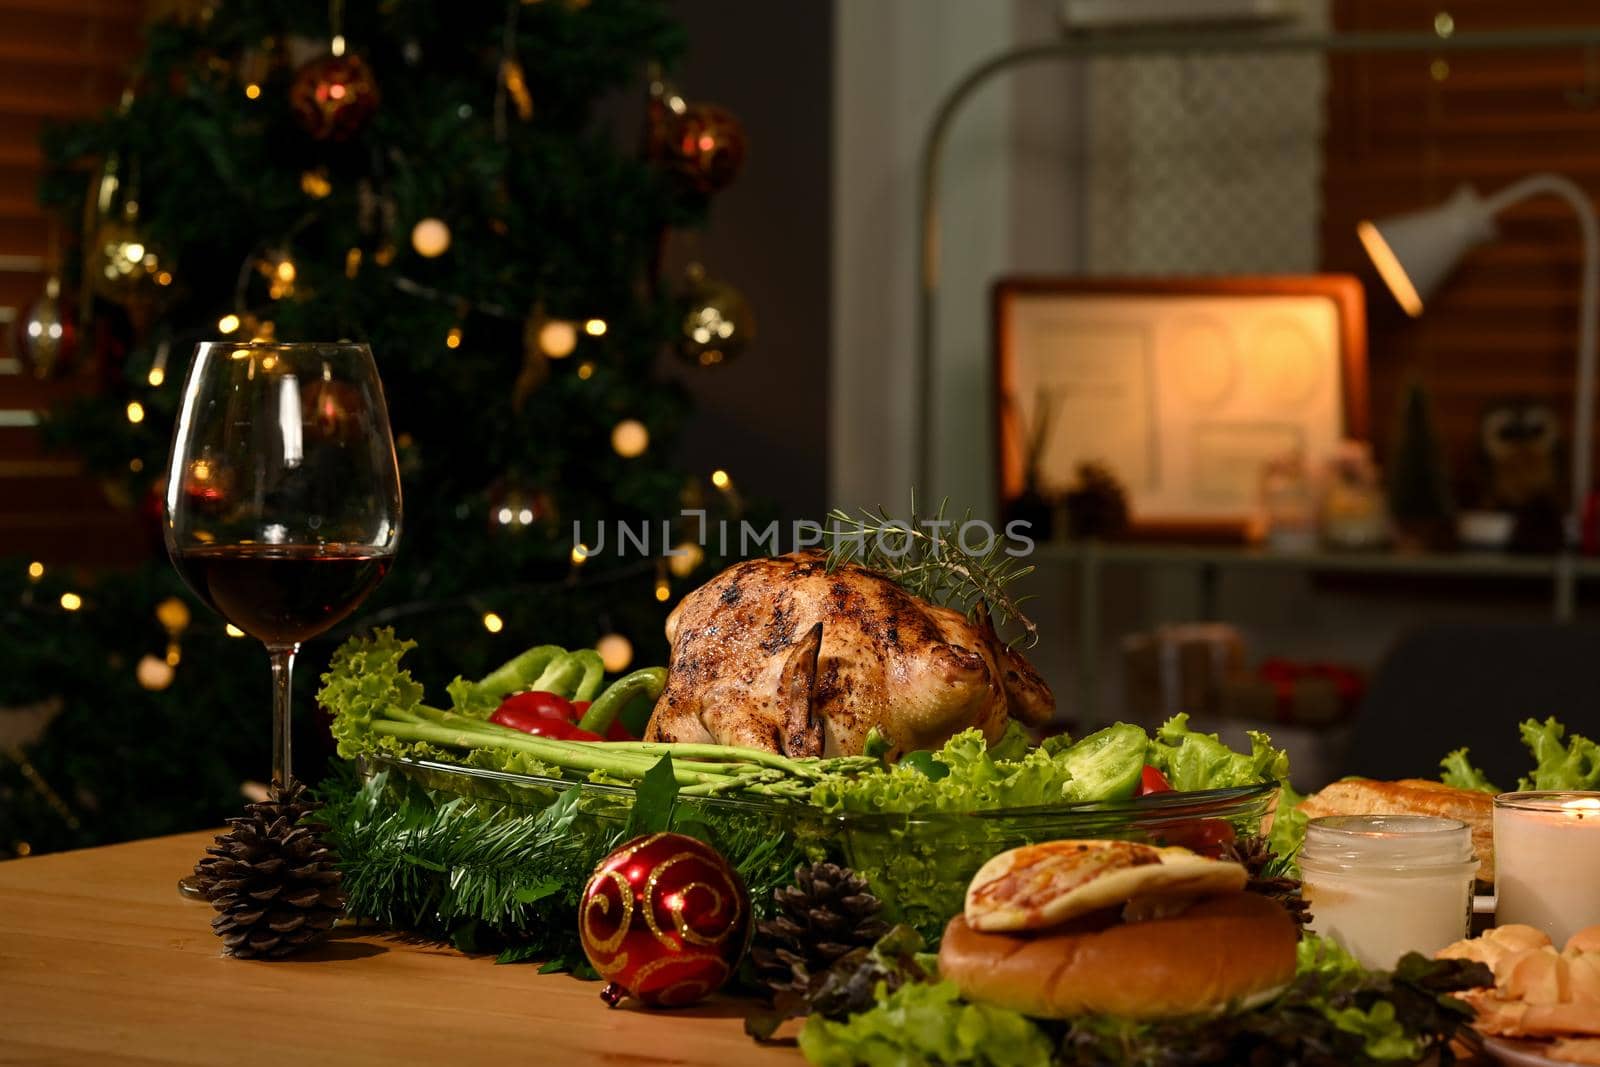 Thanksgiving table with roasted turkey, red wine and sides dishes in decorated room with a Christmas tree.